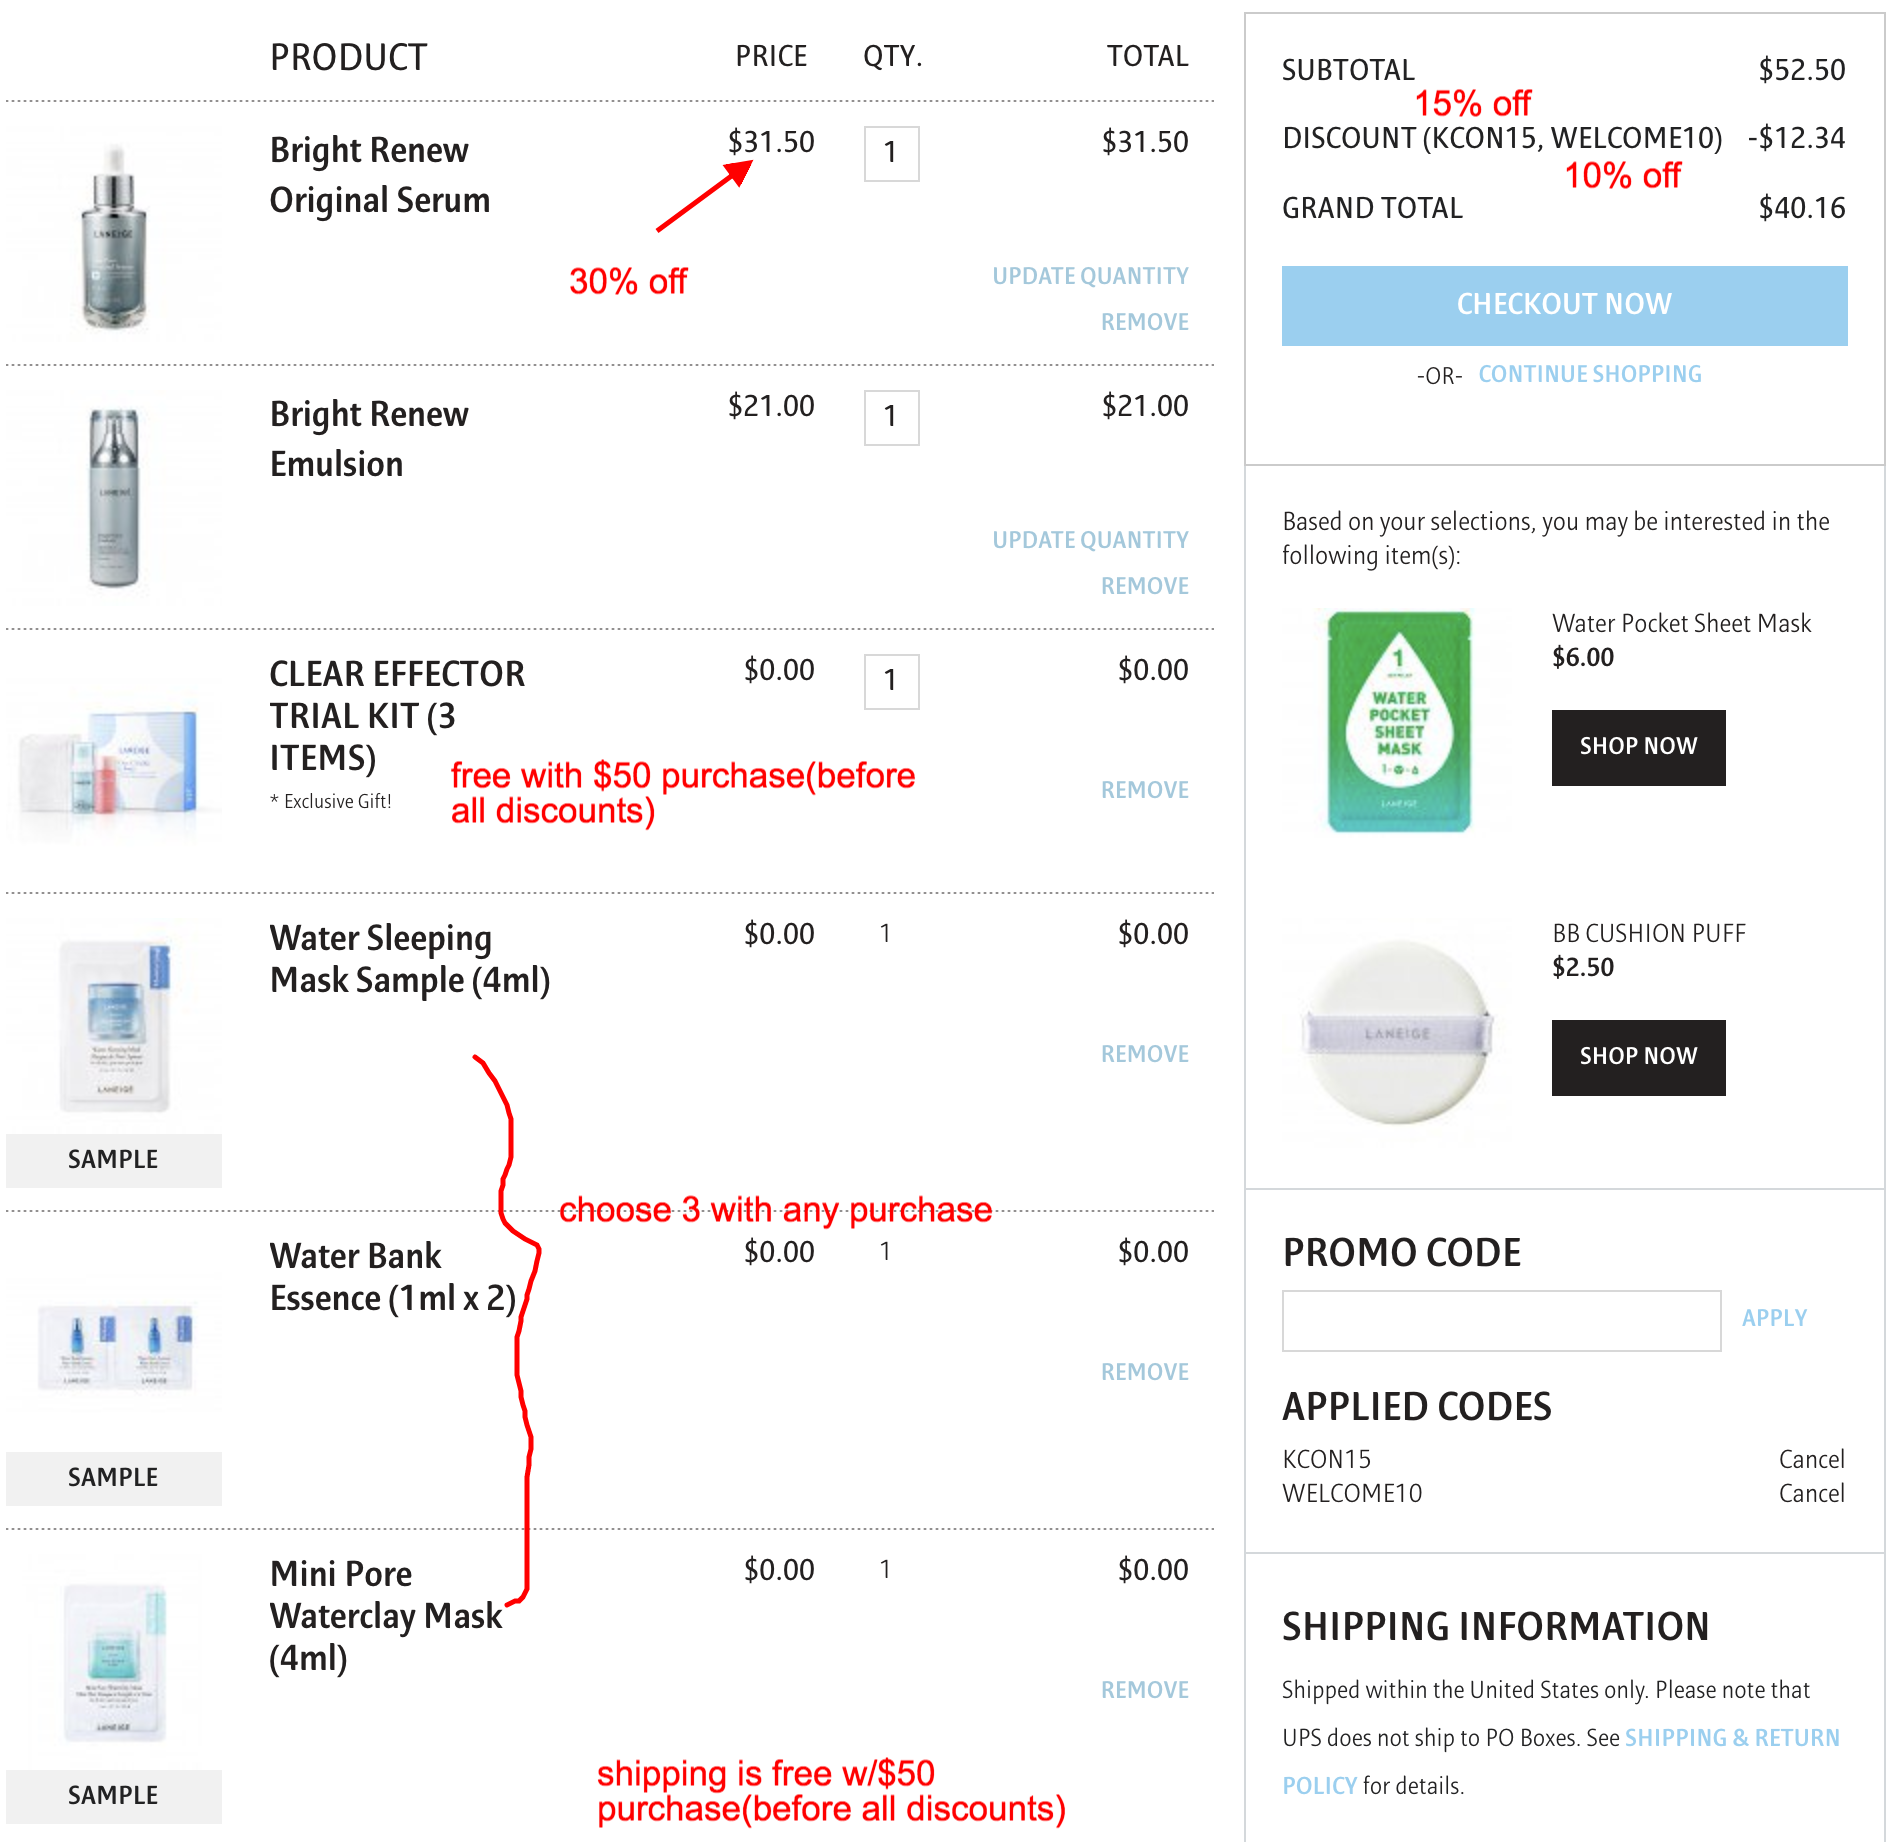 Laneige 30 off Bright Renew Collection + extra 15 off + extra 10